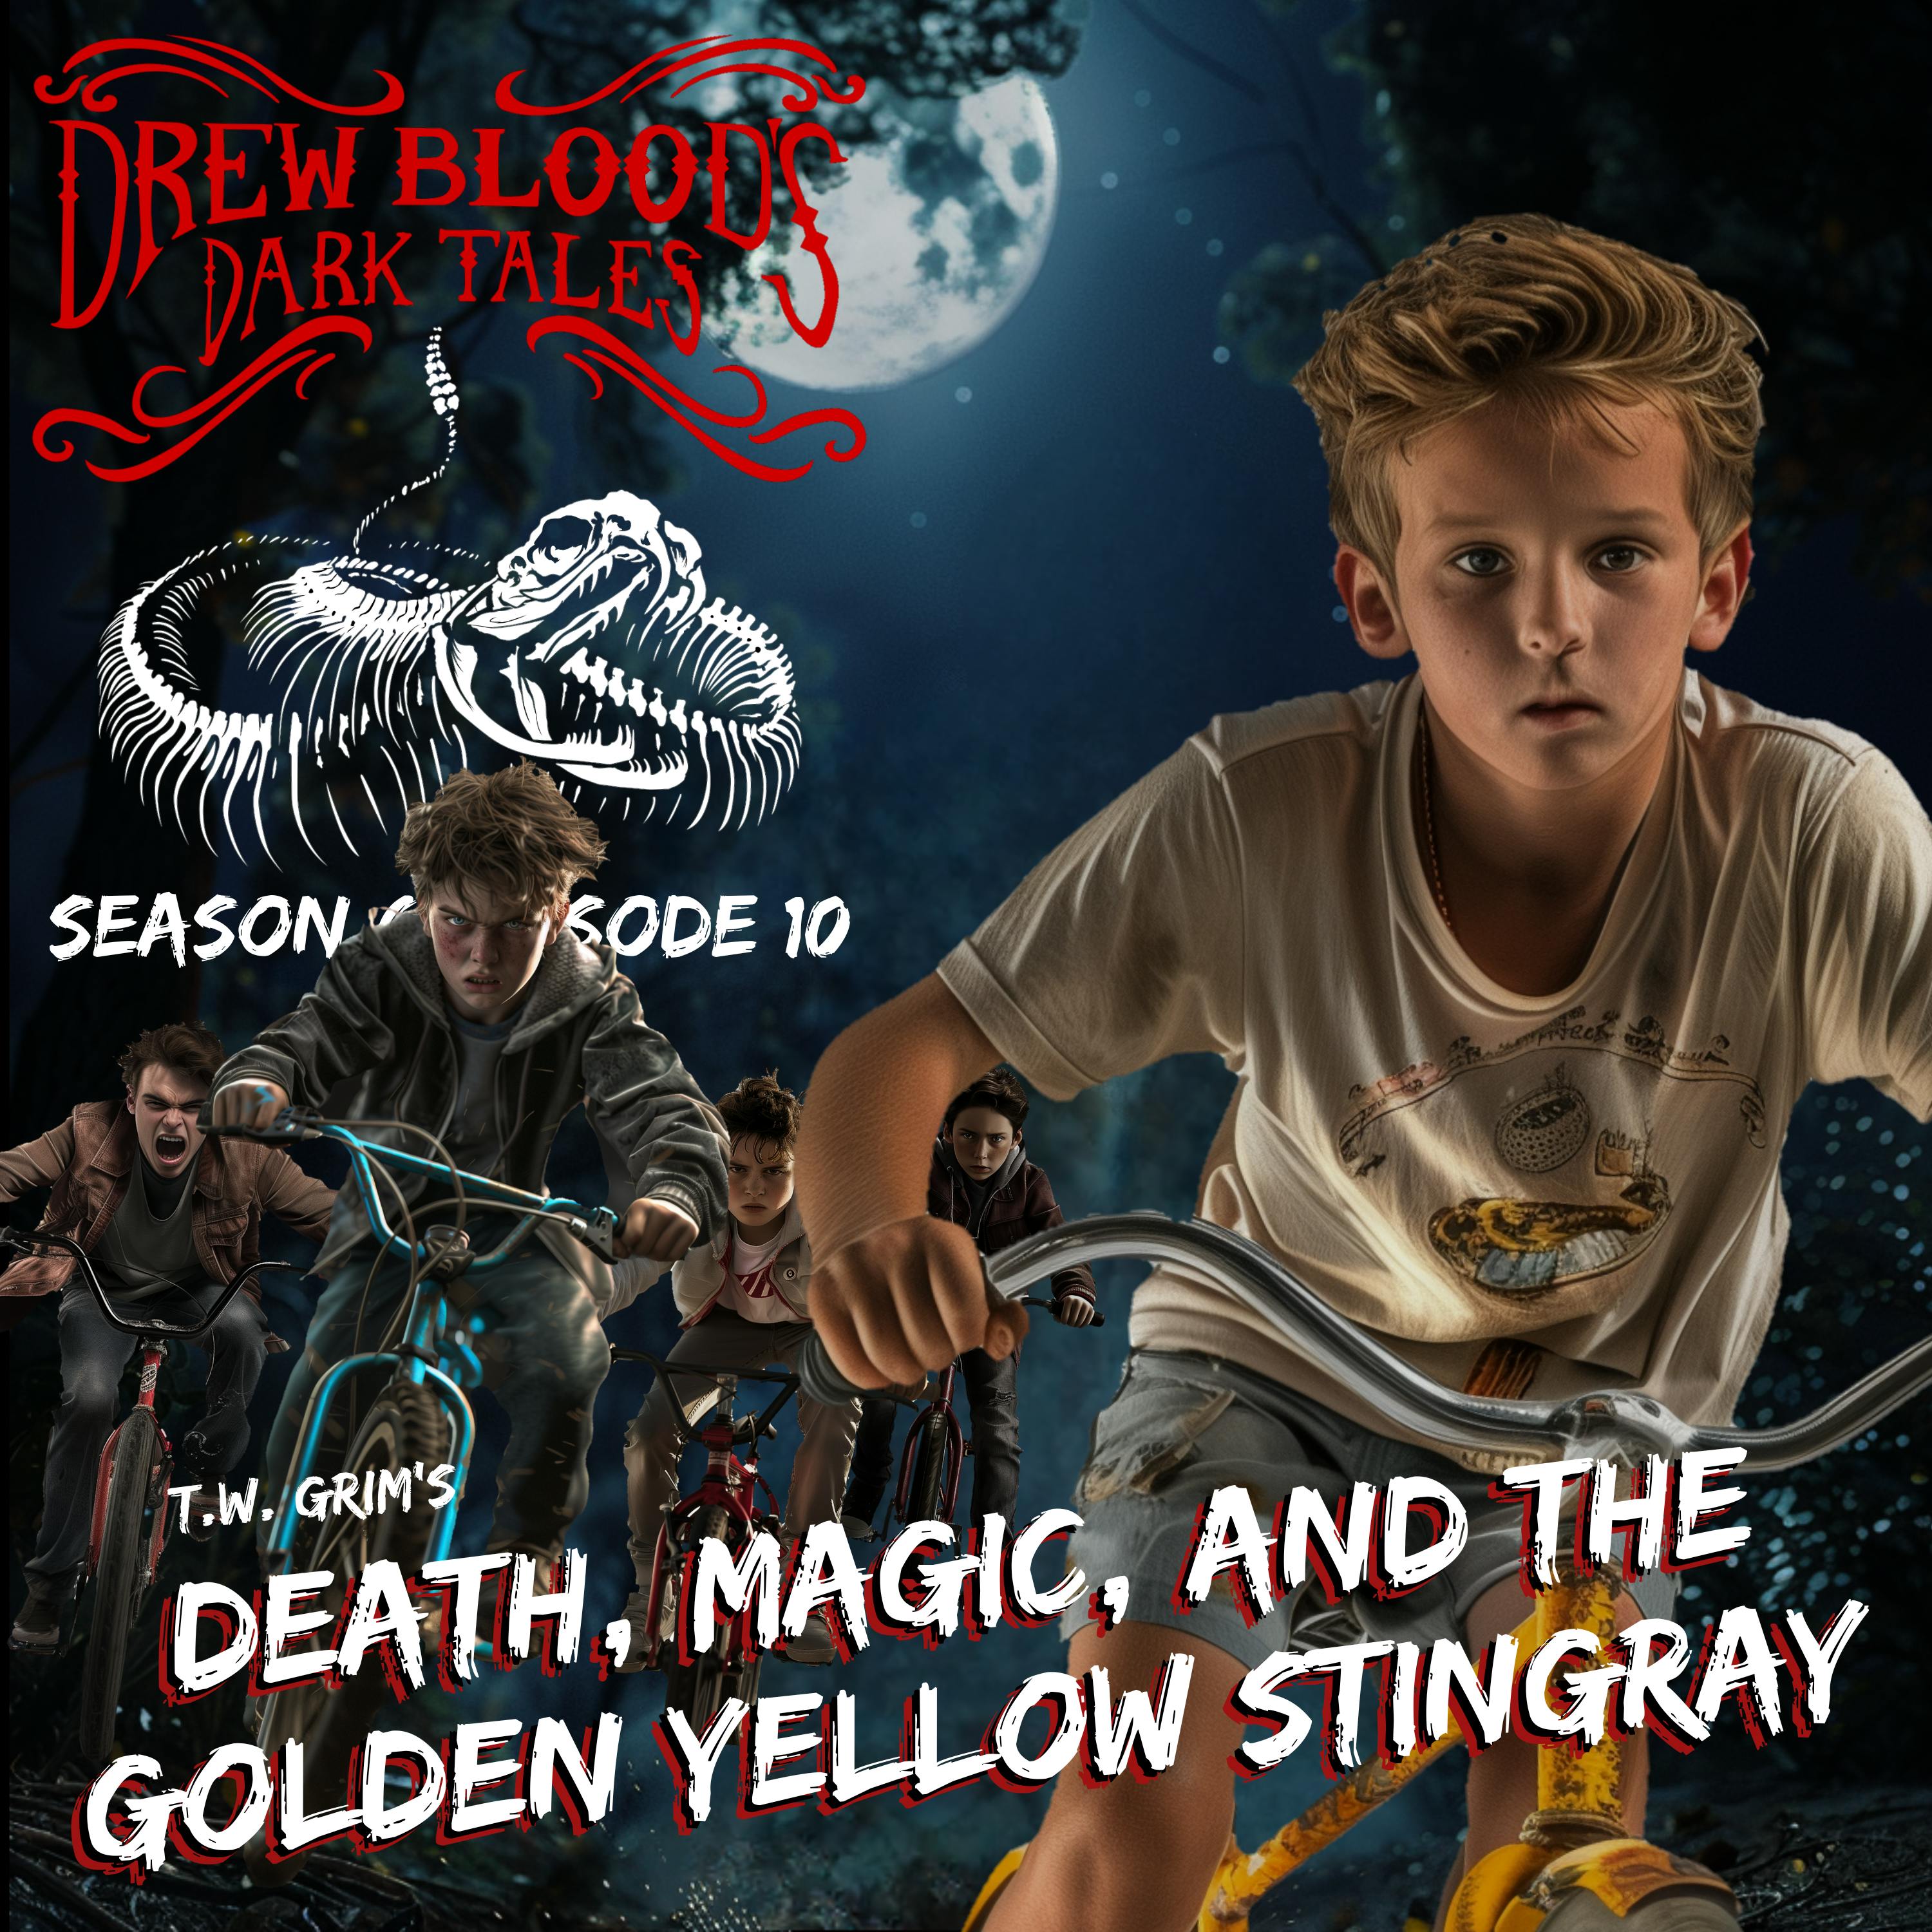 S6E10 - "Death, Magic, and the Golden Yellow Stingray" - Drew Blood